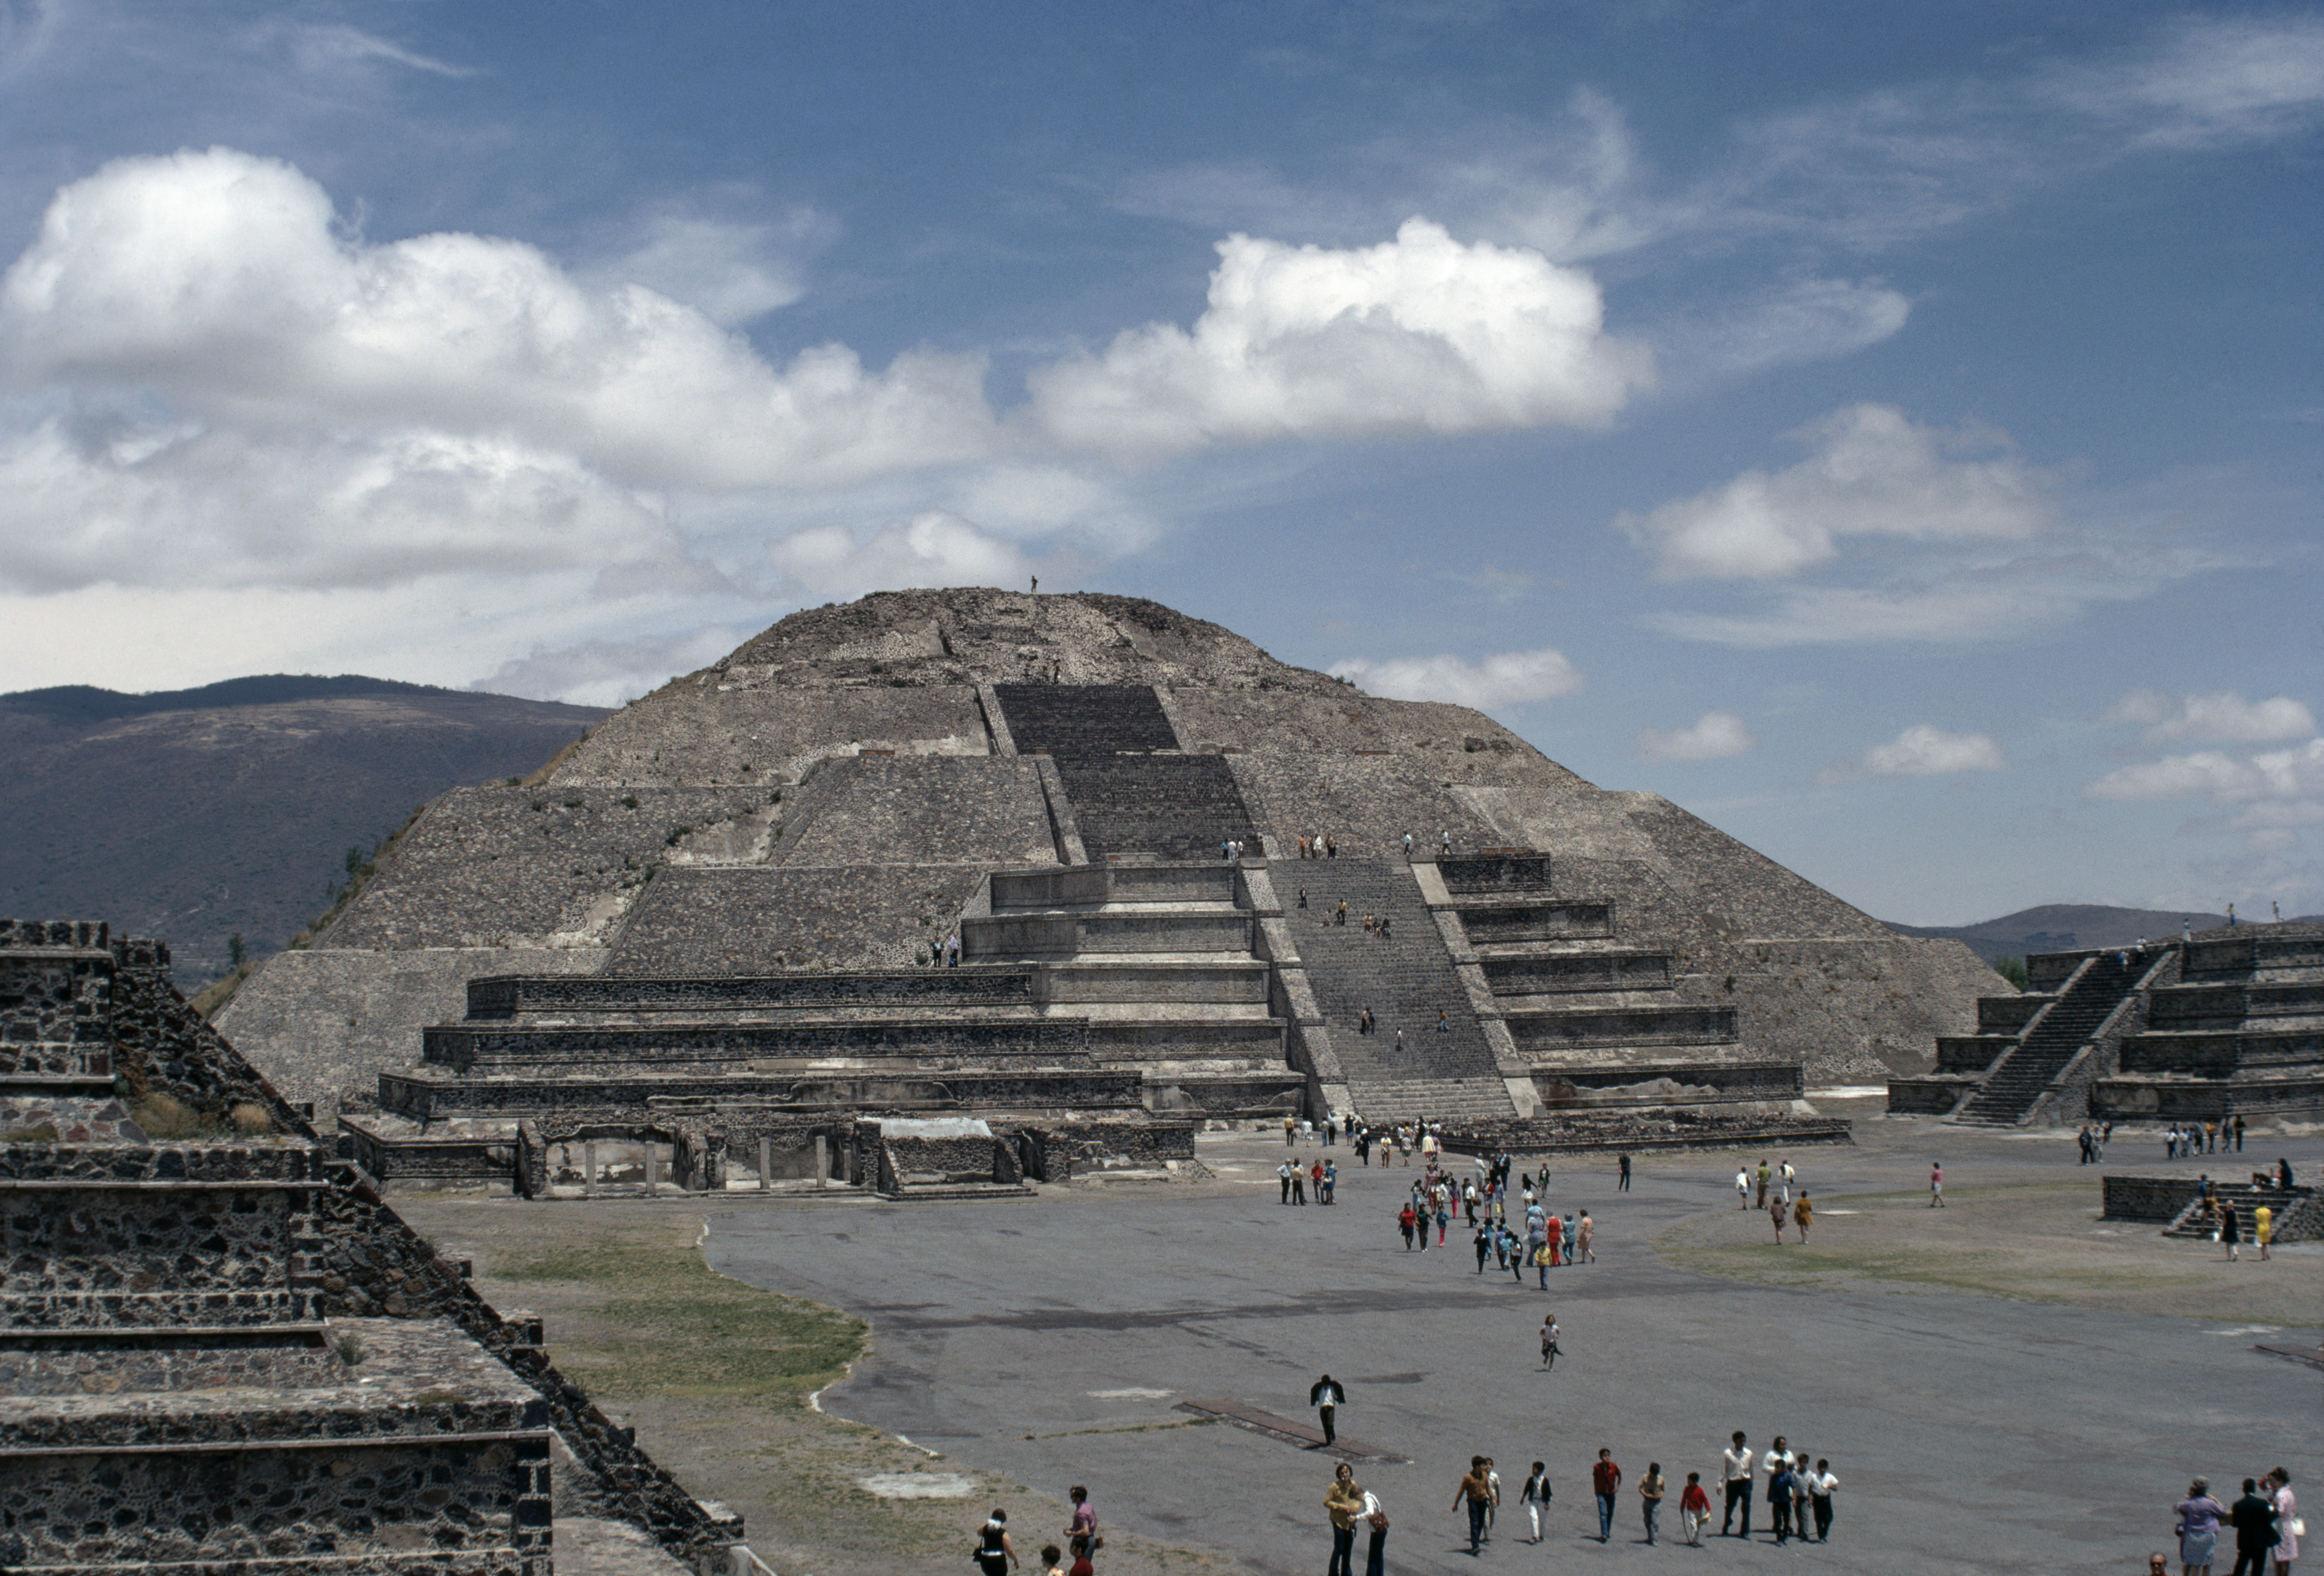 Pyramid of the Moon with tourists at Teotihuacán, Mexico